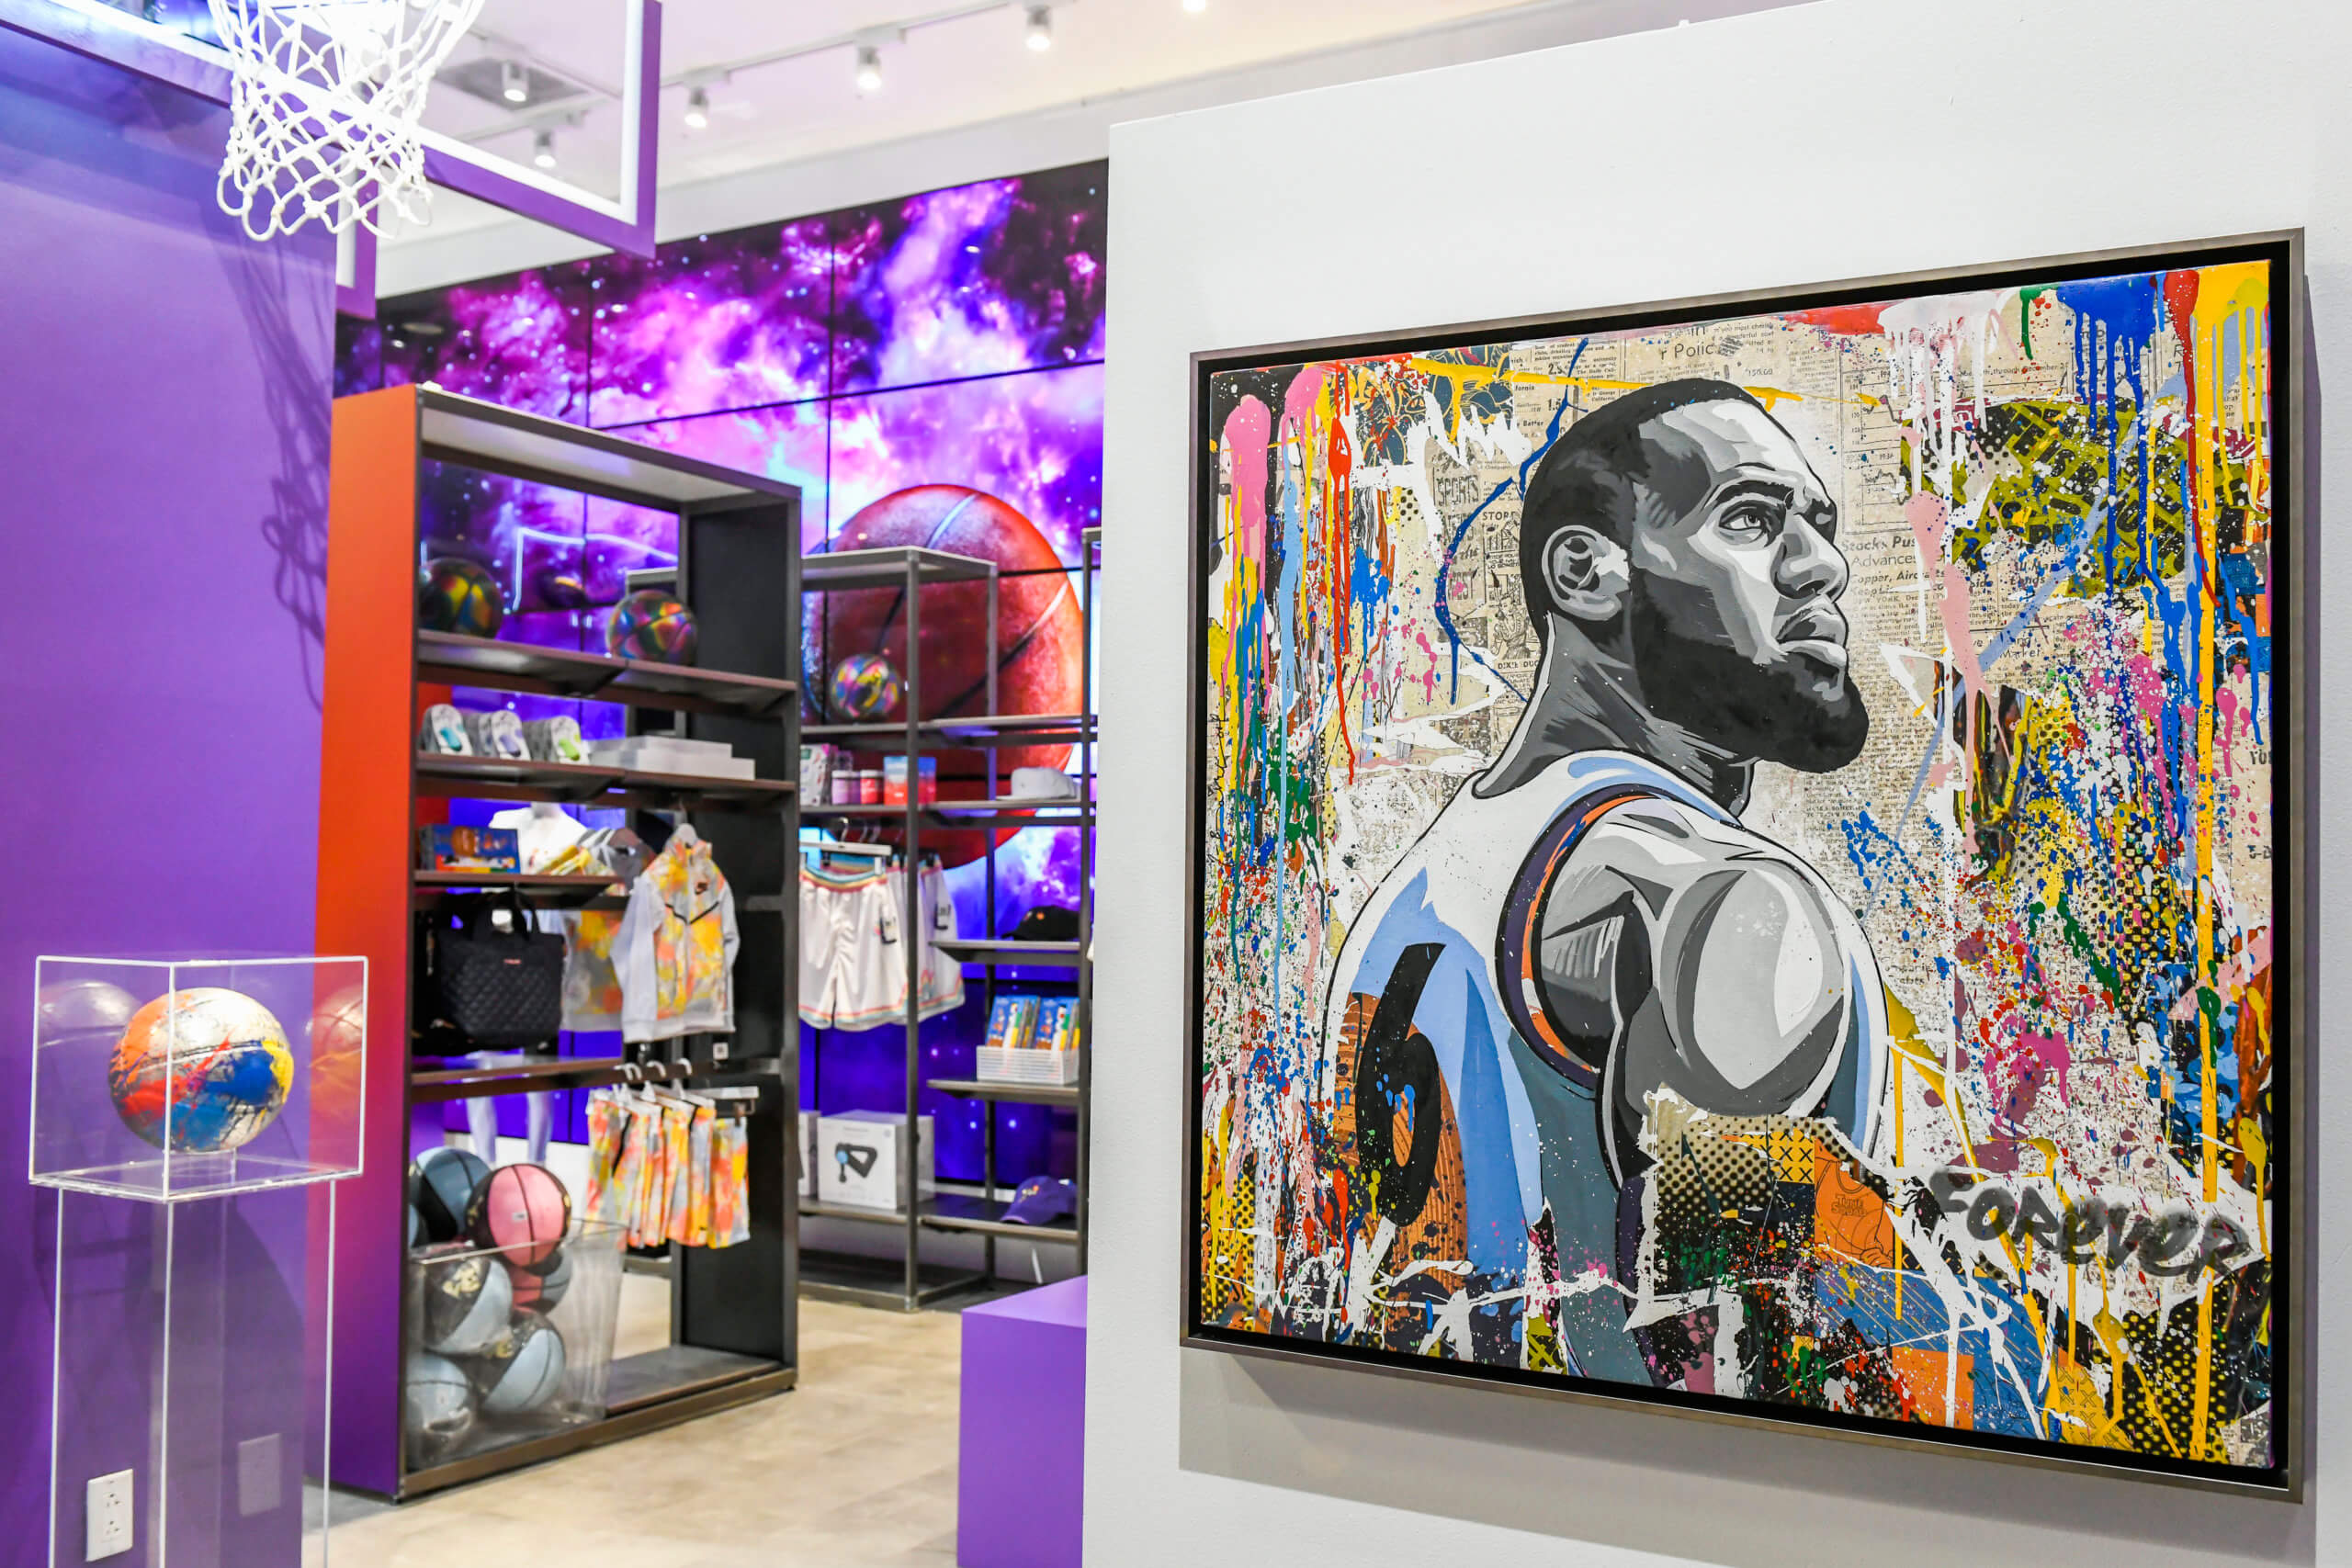 New 'Space Jam' themed pop-up opens at Bloomingdale's flagship